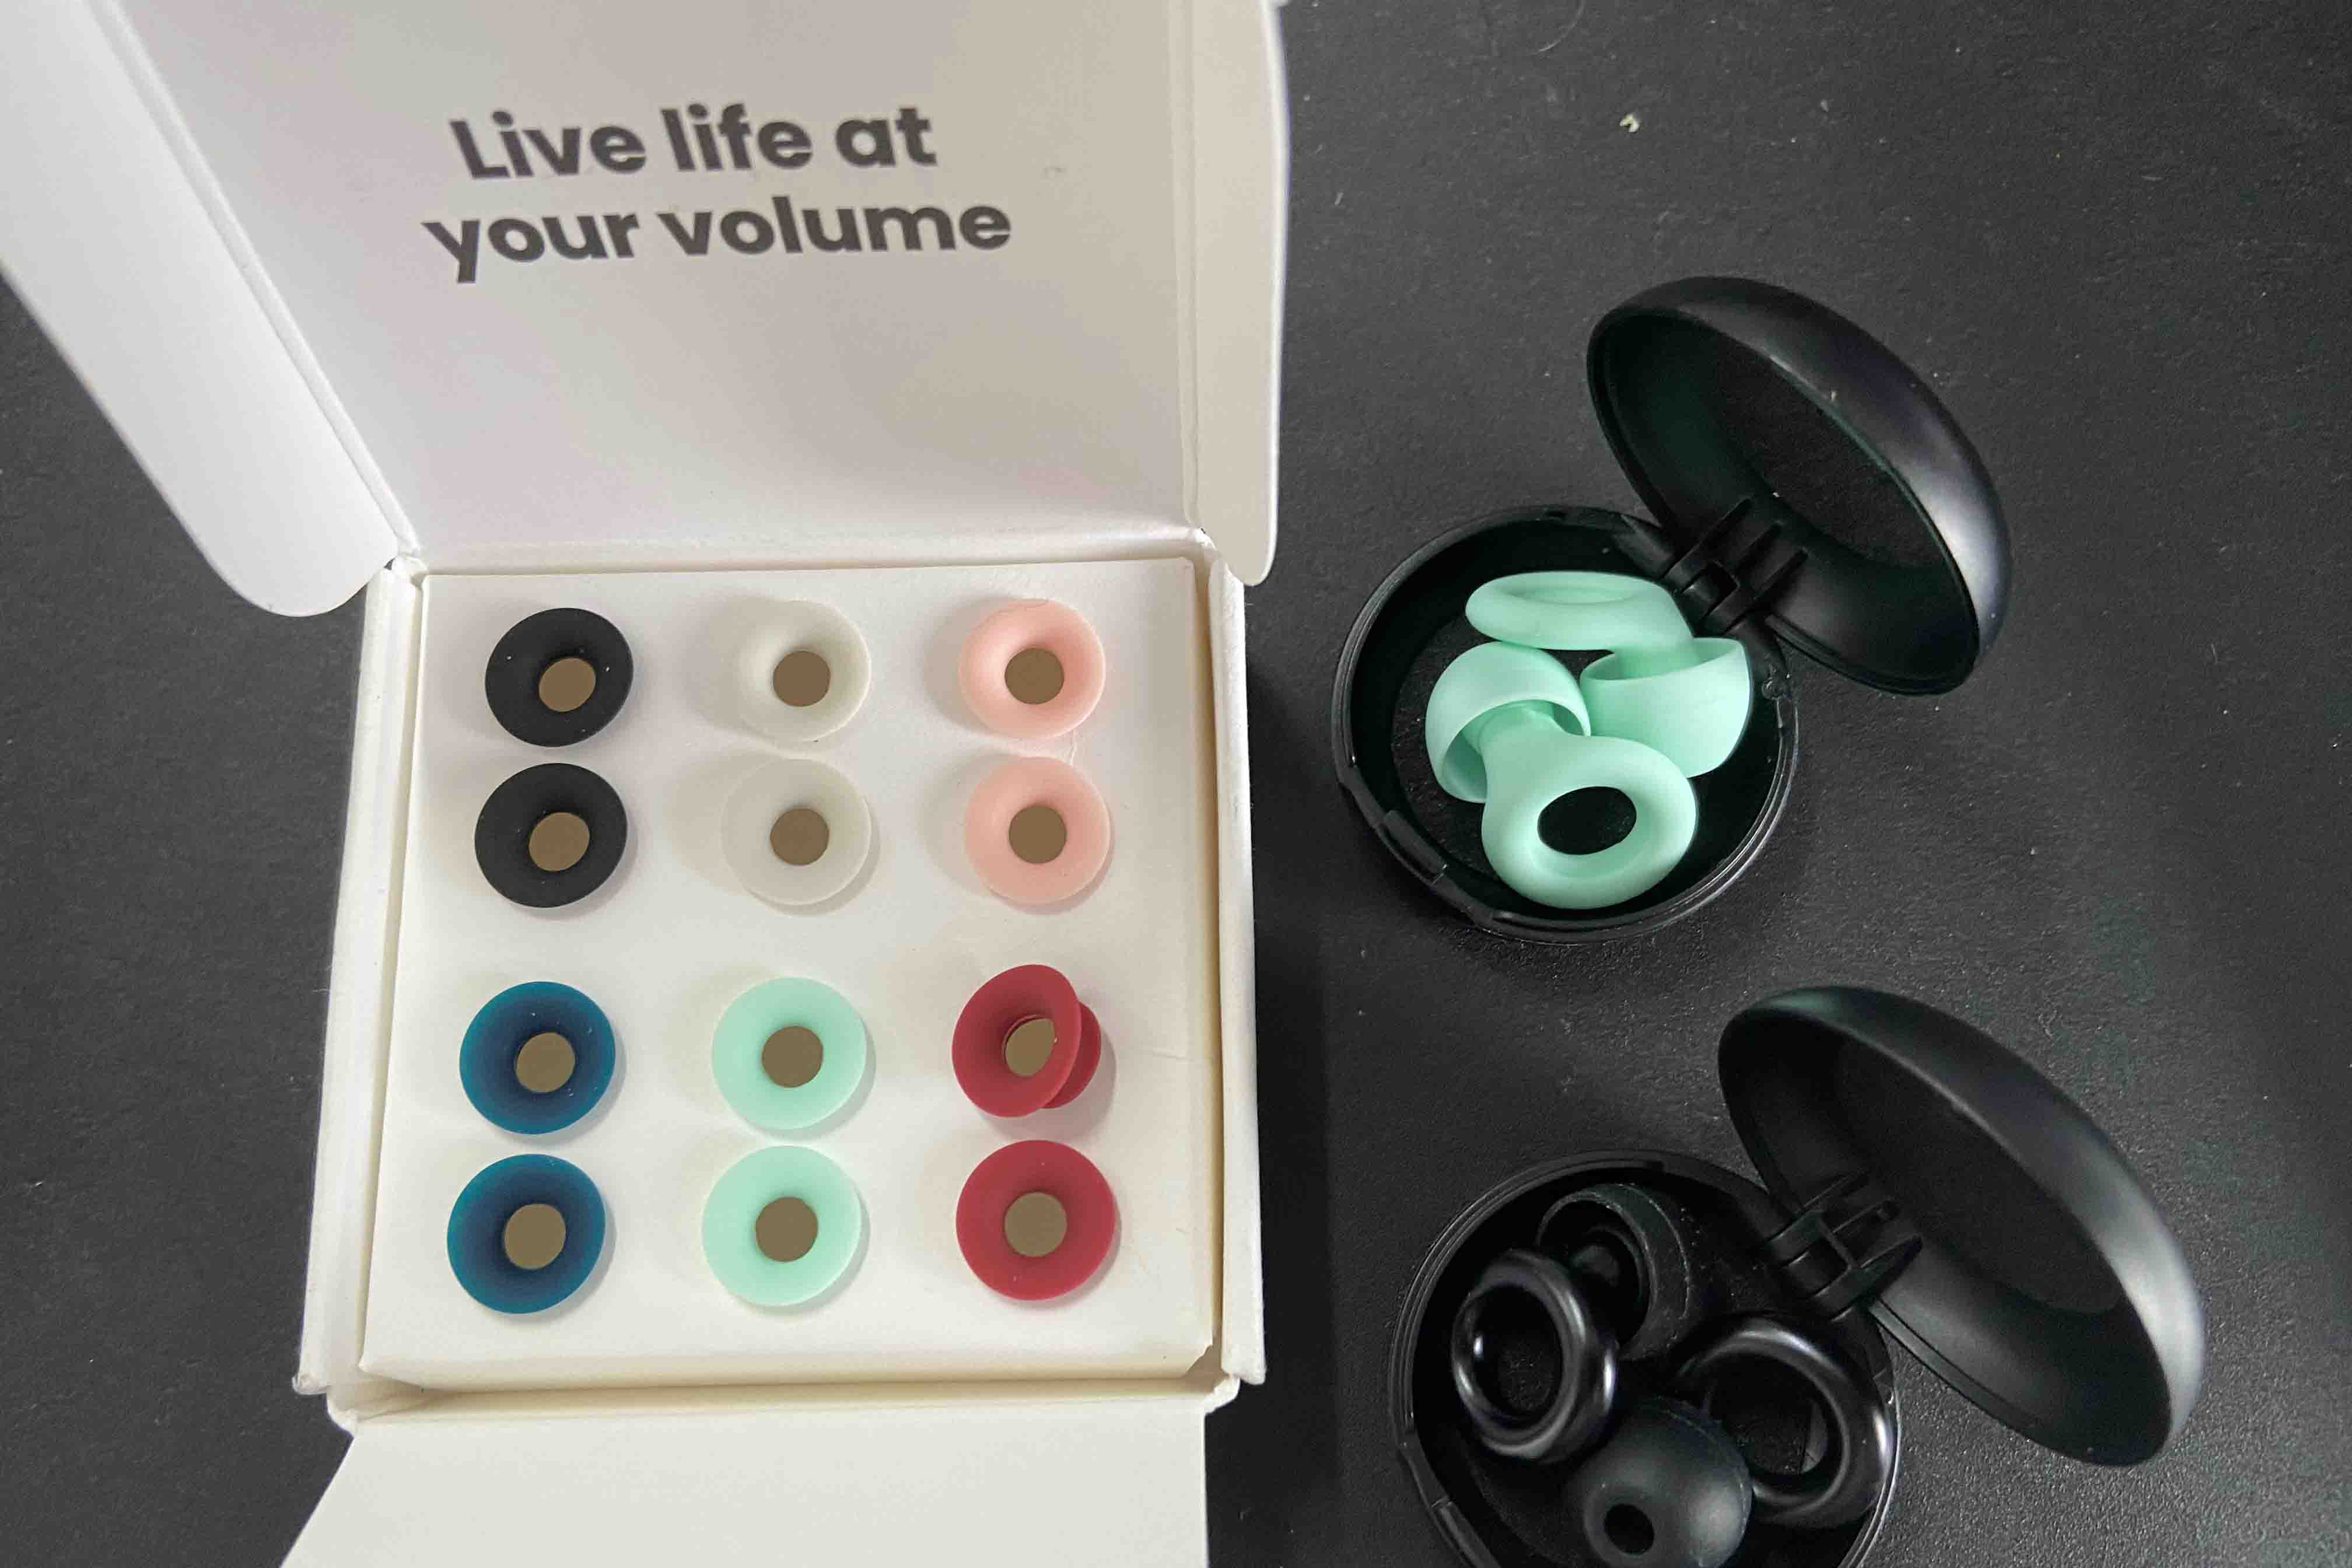 Unboxing Loop Quiet vs Loop Engage Earplugs. What's the difference?  #hearinghealth #shorts 